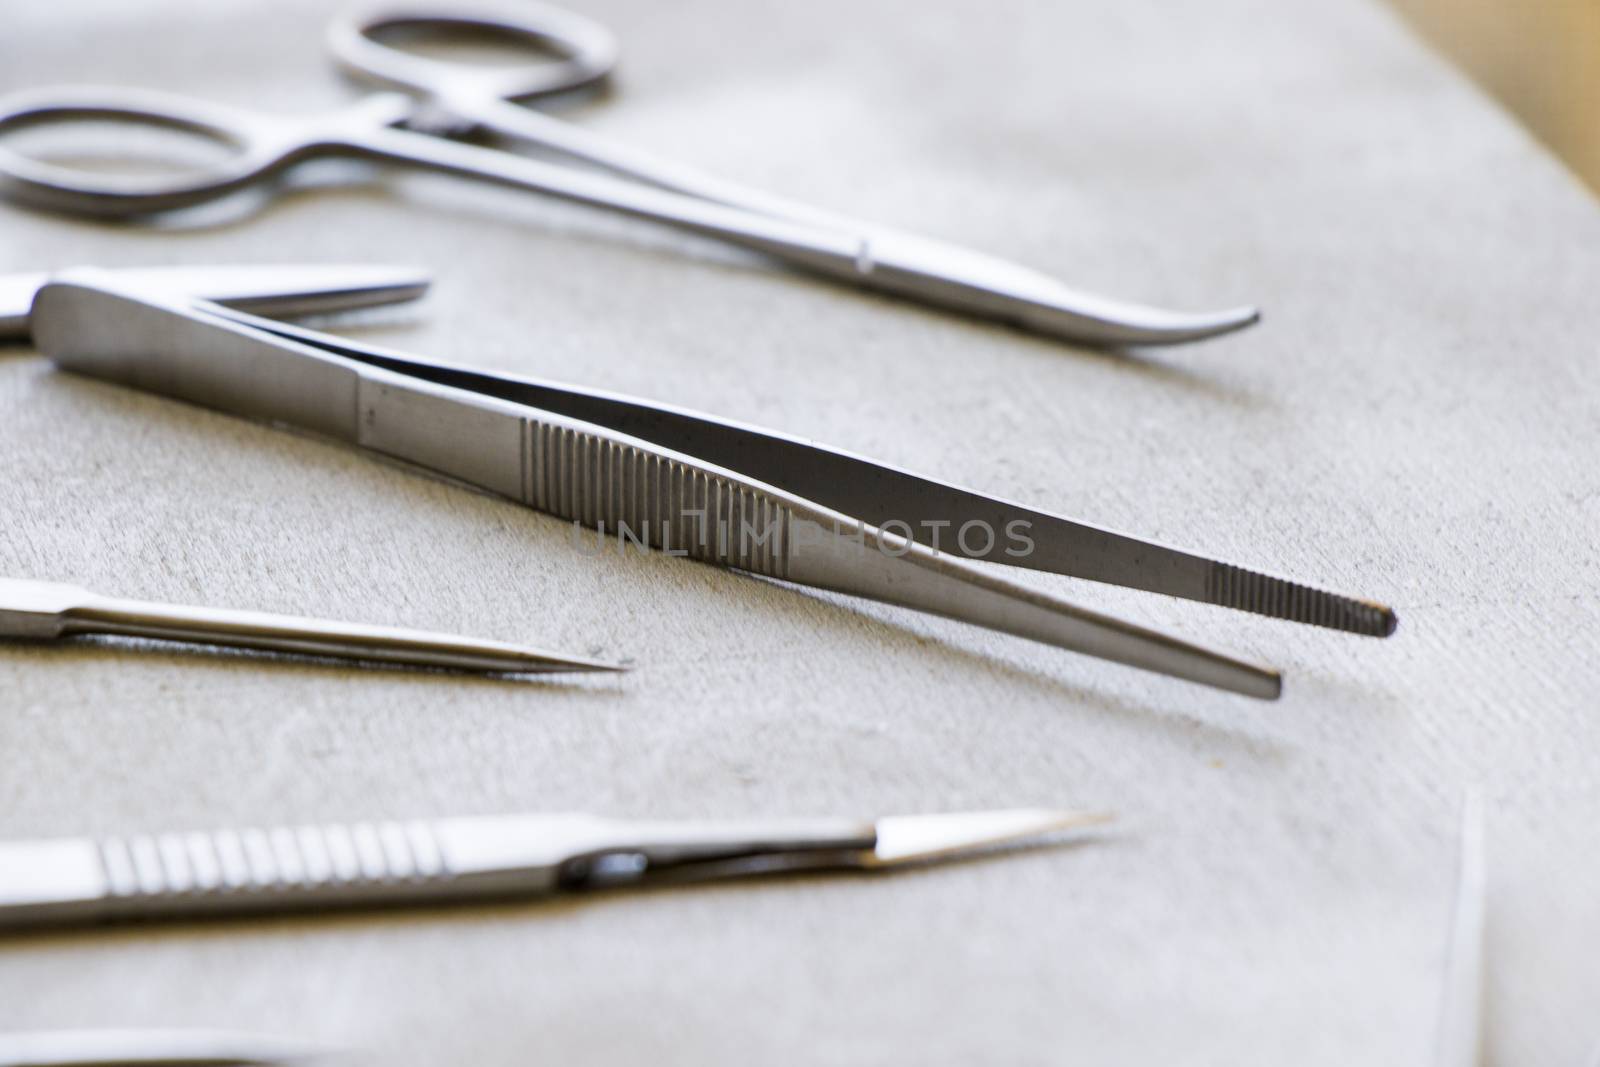 Dissection Kit - Stainless Steel Tools for Medical Students of Anatomy, Biology, Veterinary, Marine Biology